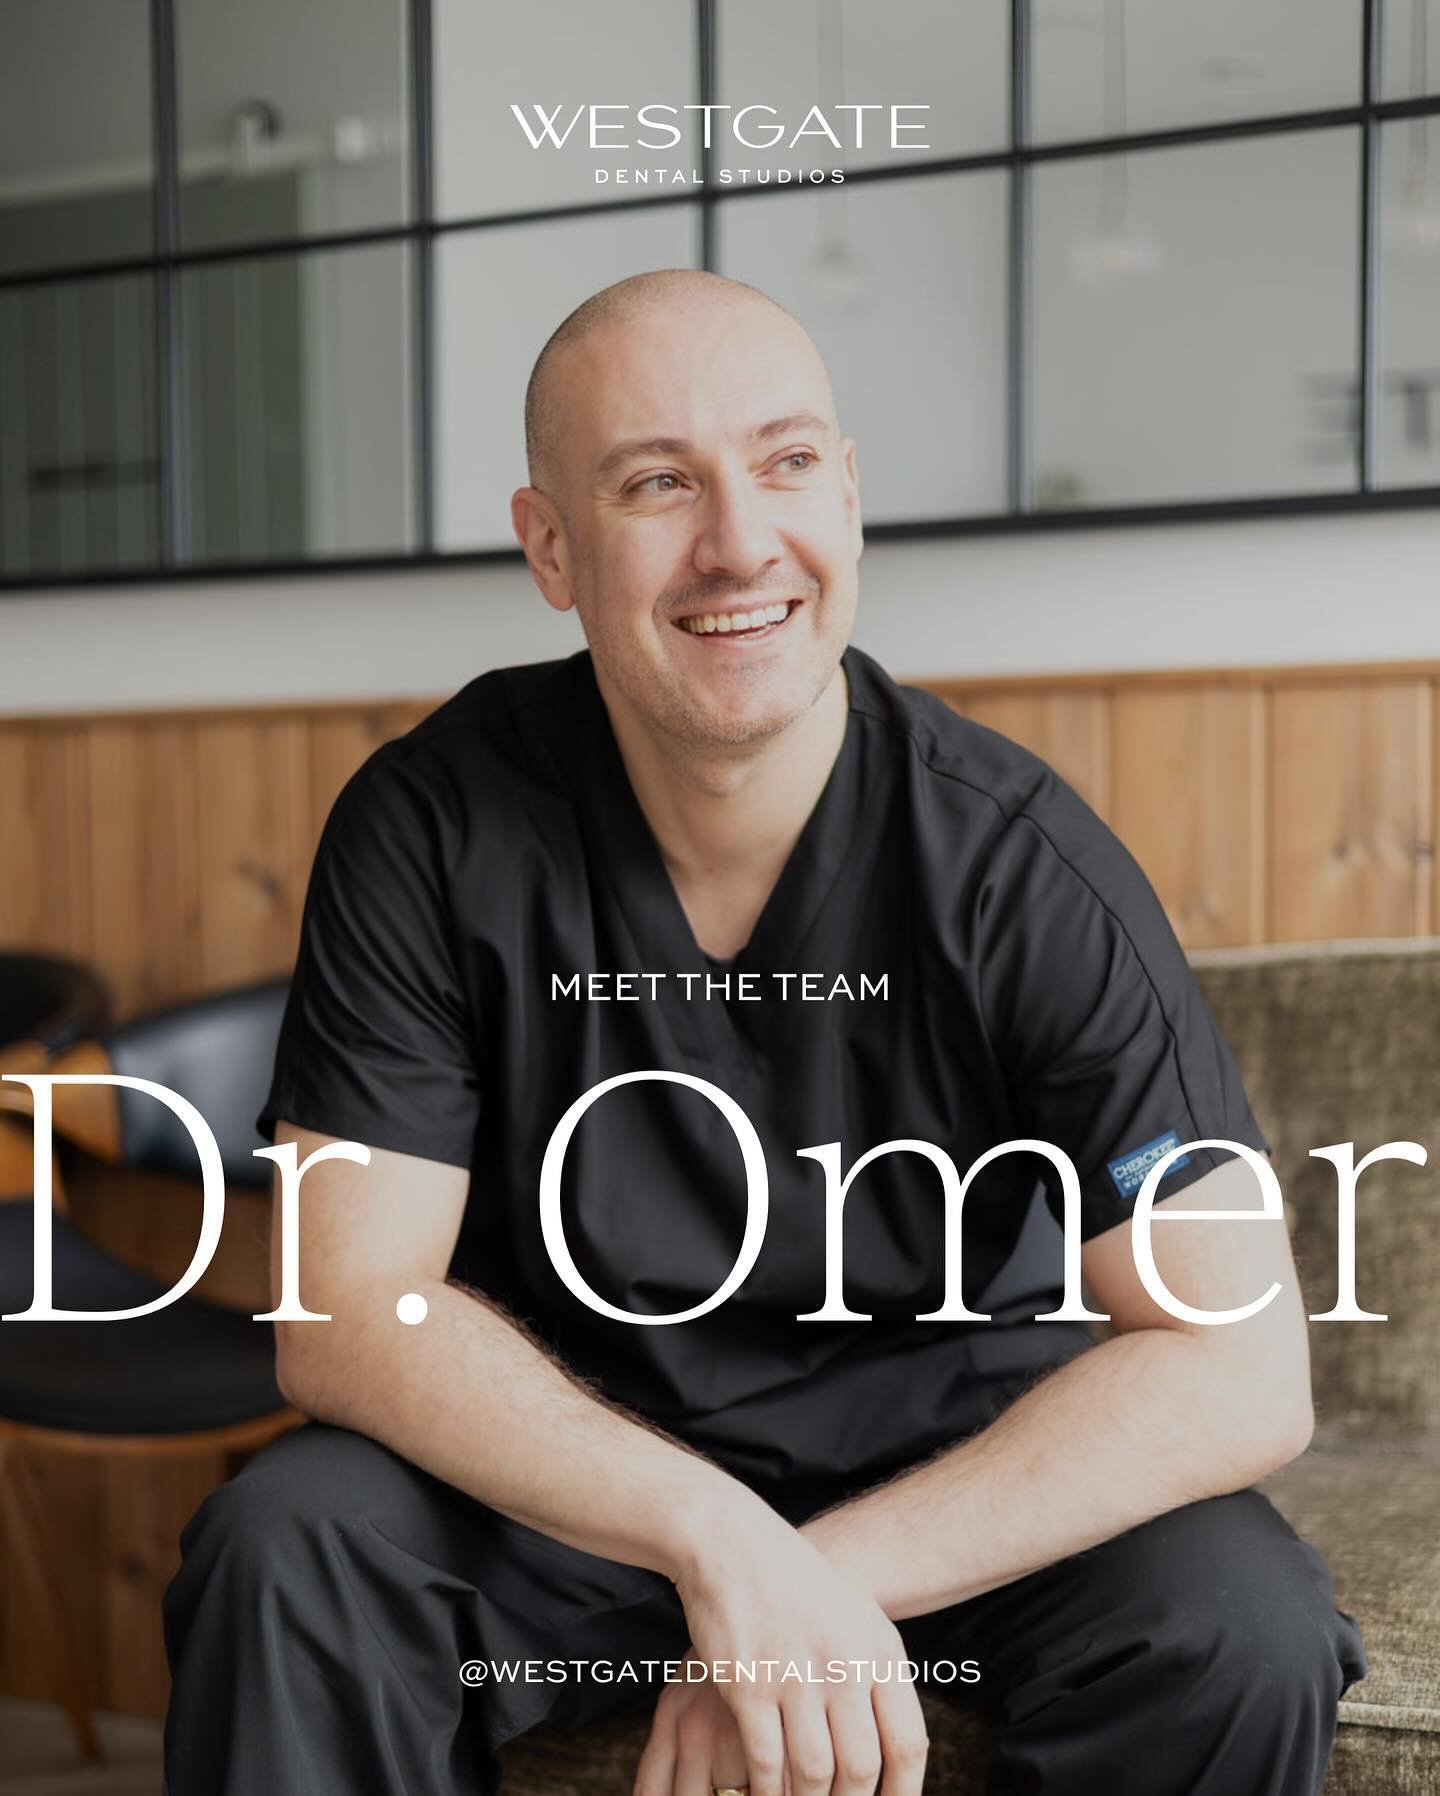 Meet Omer 👋 

Omer qualified from the University of Sheffield in 2006, and went on to work in practices in Yorkshire &amp; the Northwest for a number of years before returning to London to be closer to his family. 

He began to focus on orthodontics